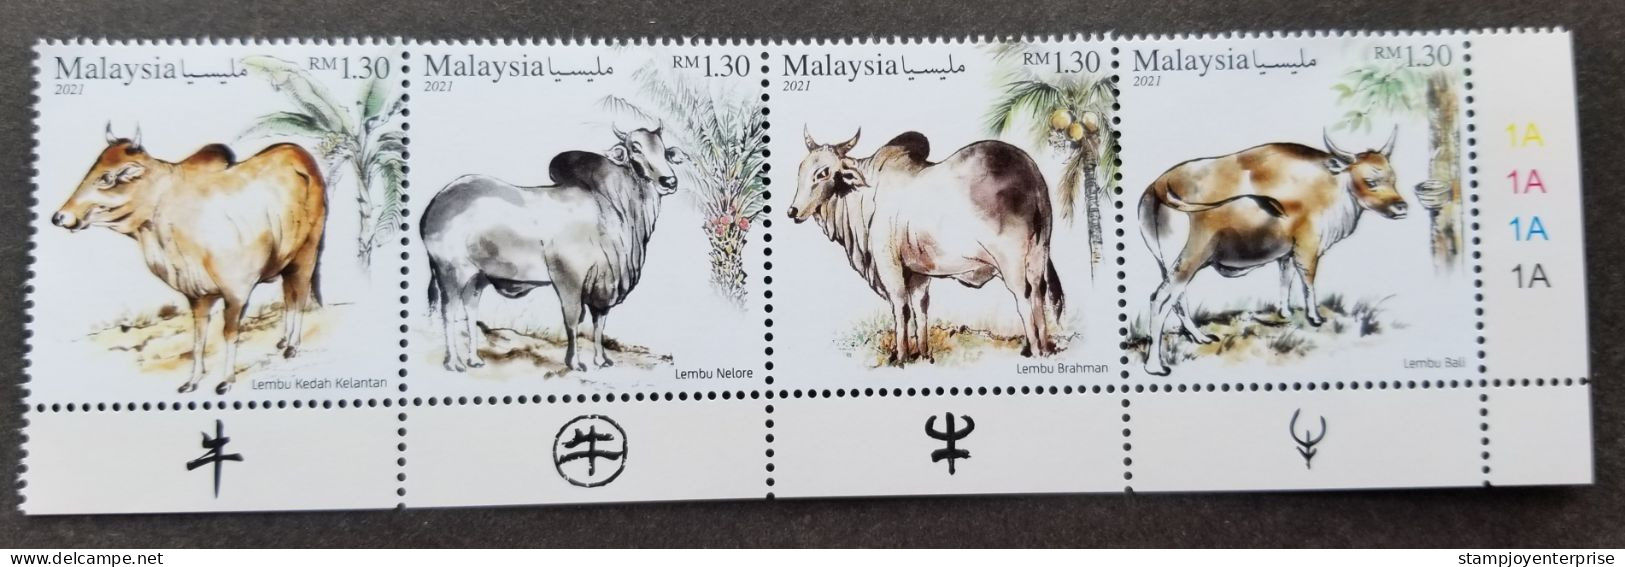 Malaysia Year Of The Ox Cattle Breeds 2021 Lunar Chinese Painting Zodiac Cow Palm Coconut Rubber Tree (stamp Plate) MNH - Malaysia (1964-...)